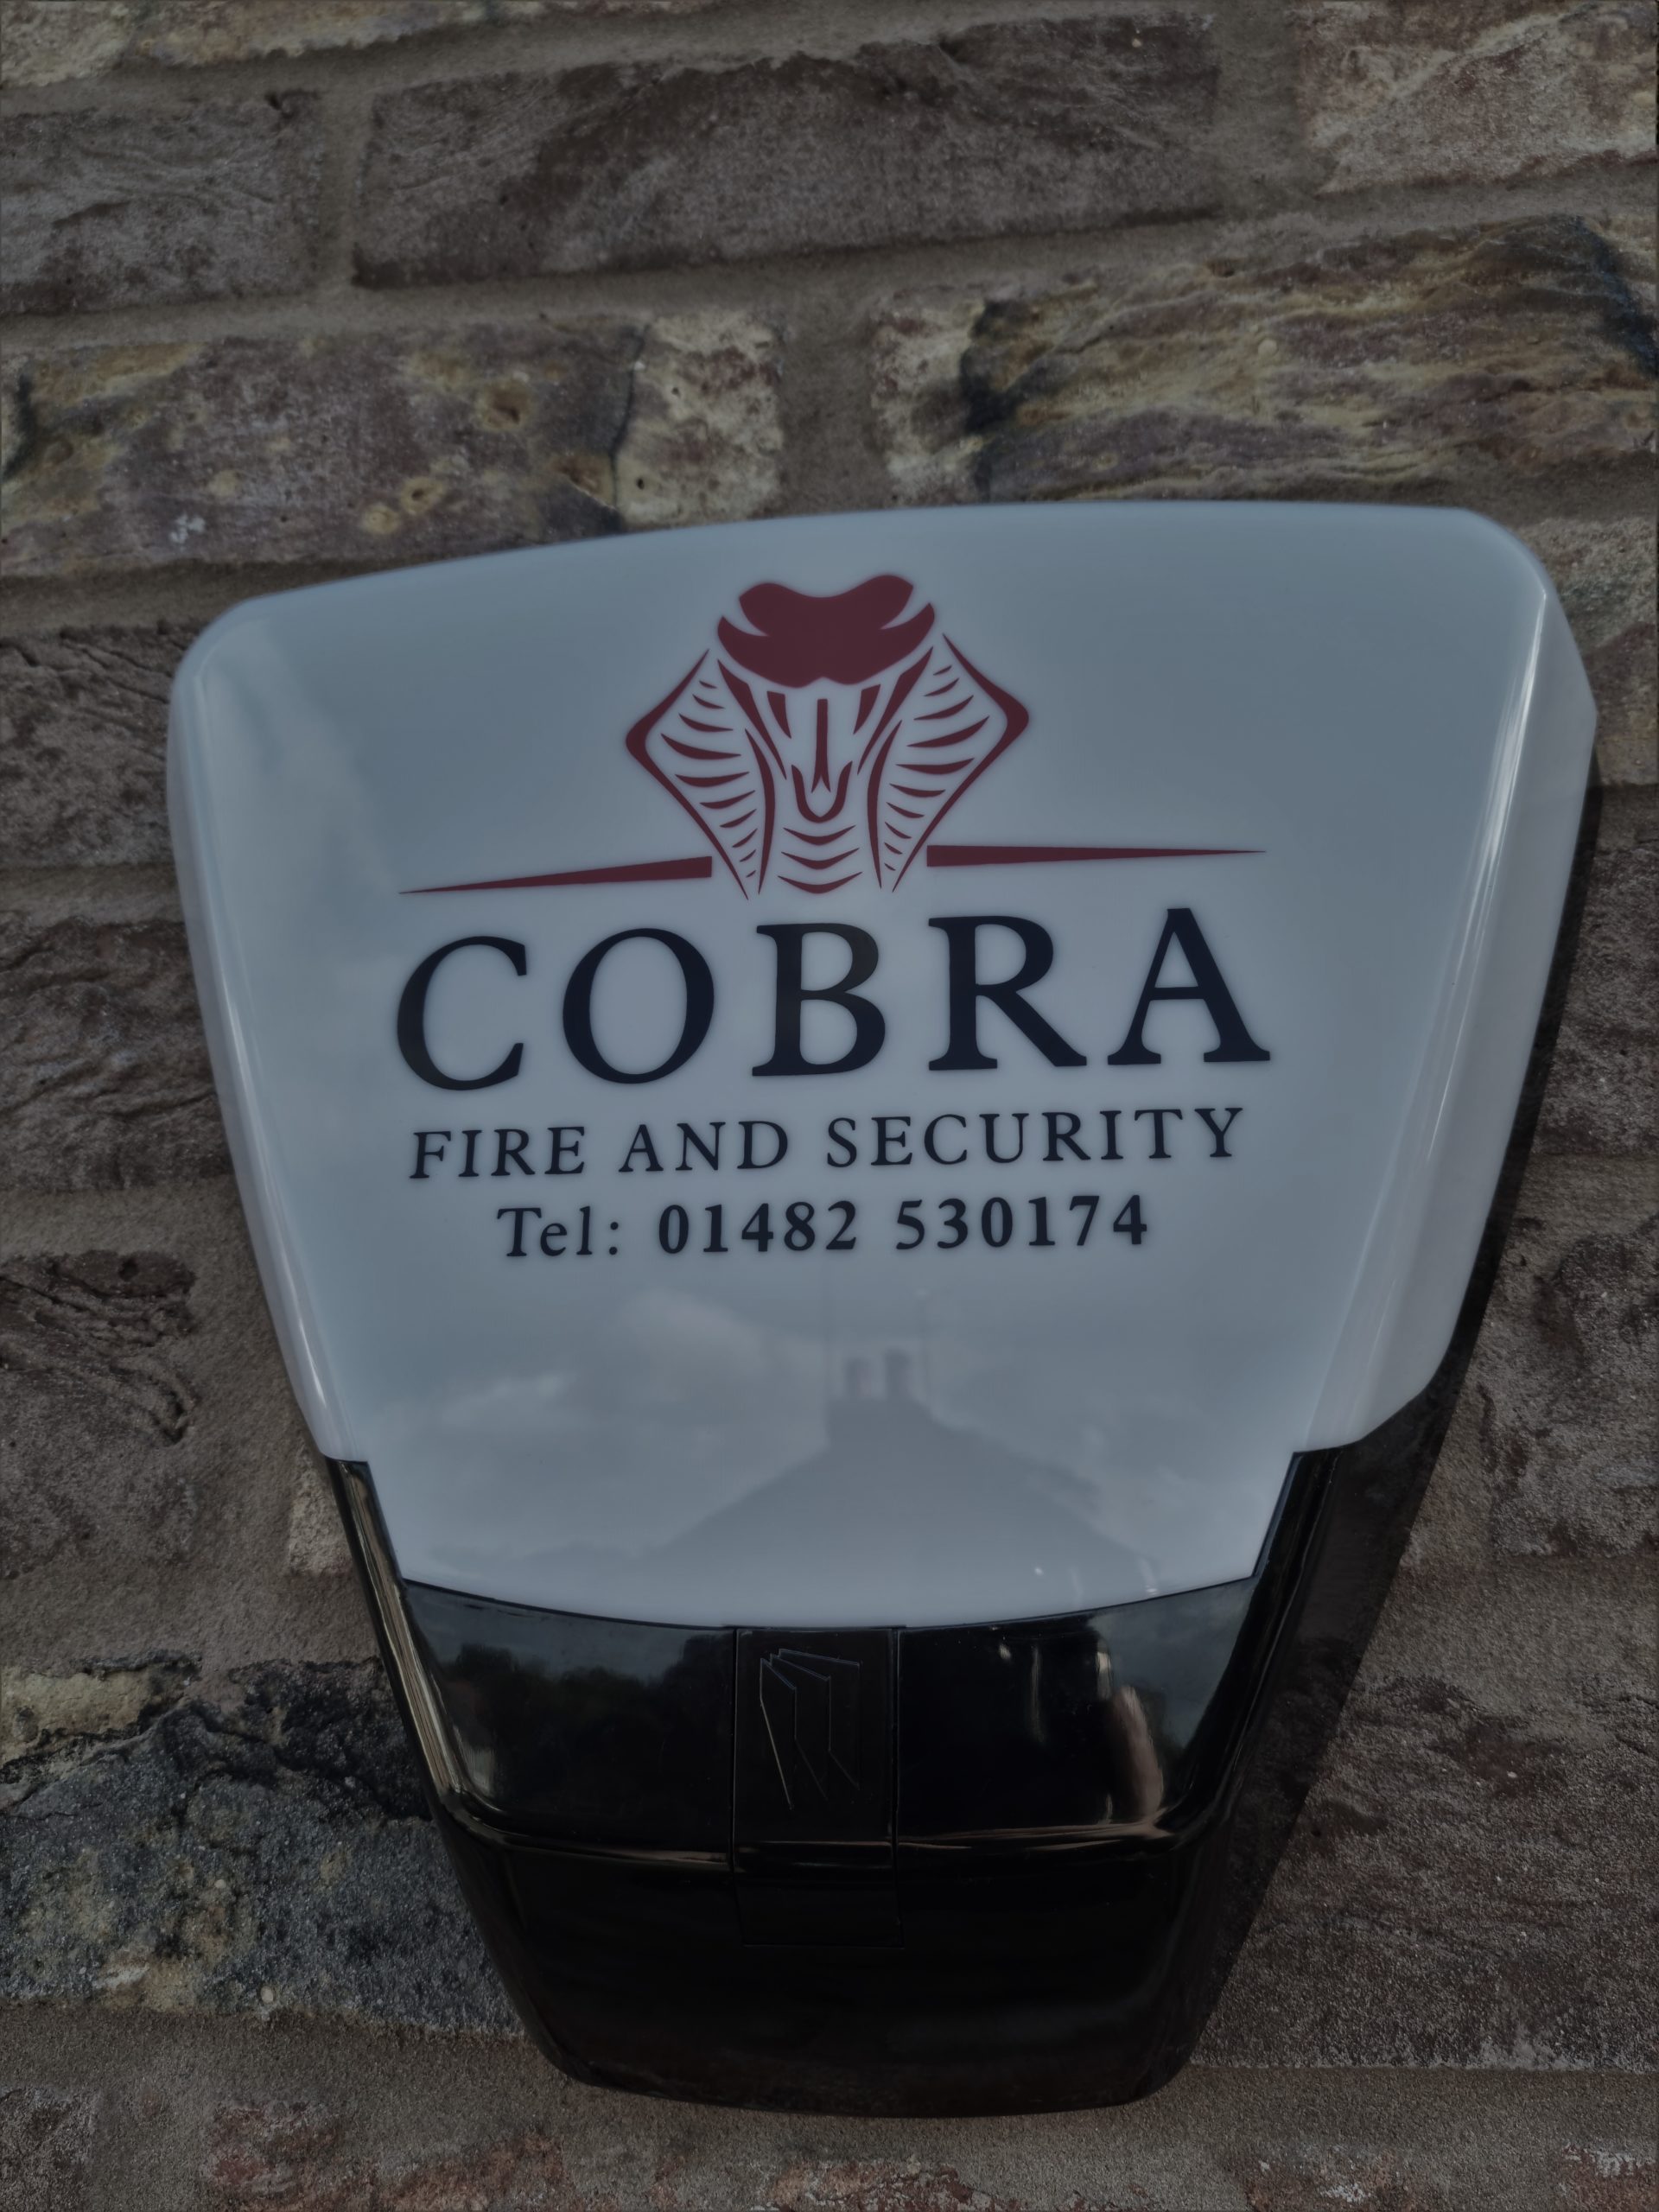 A bellbox for an Intruder Alarm system with Cobra fire and security's logo